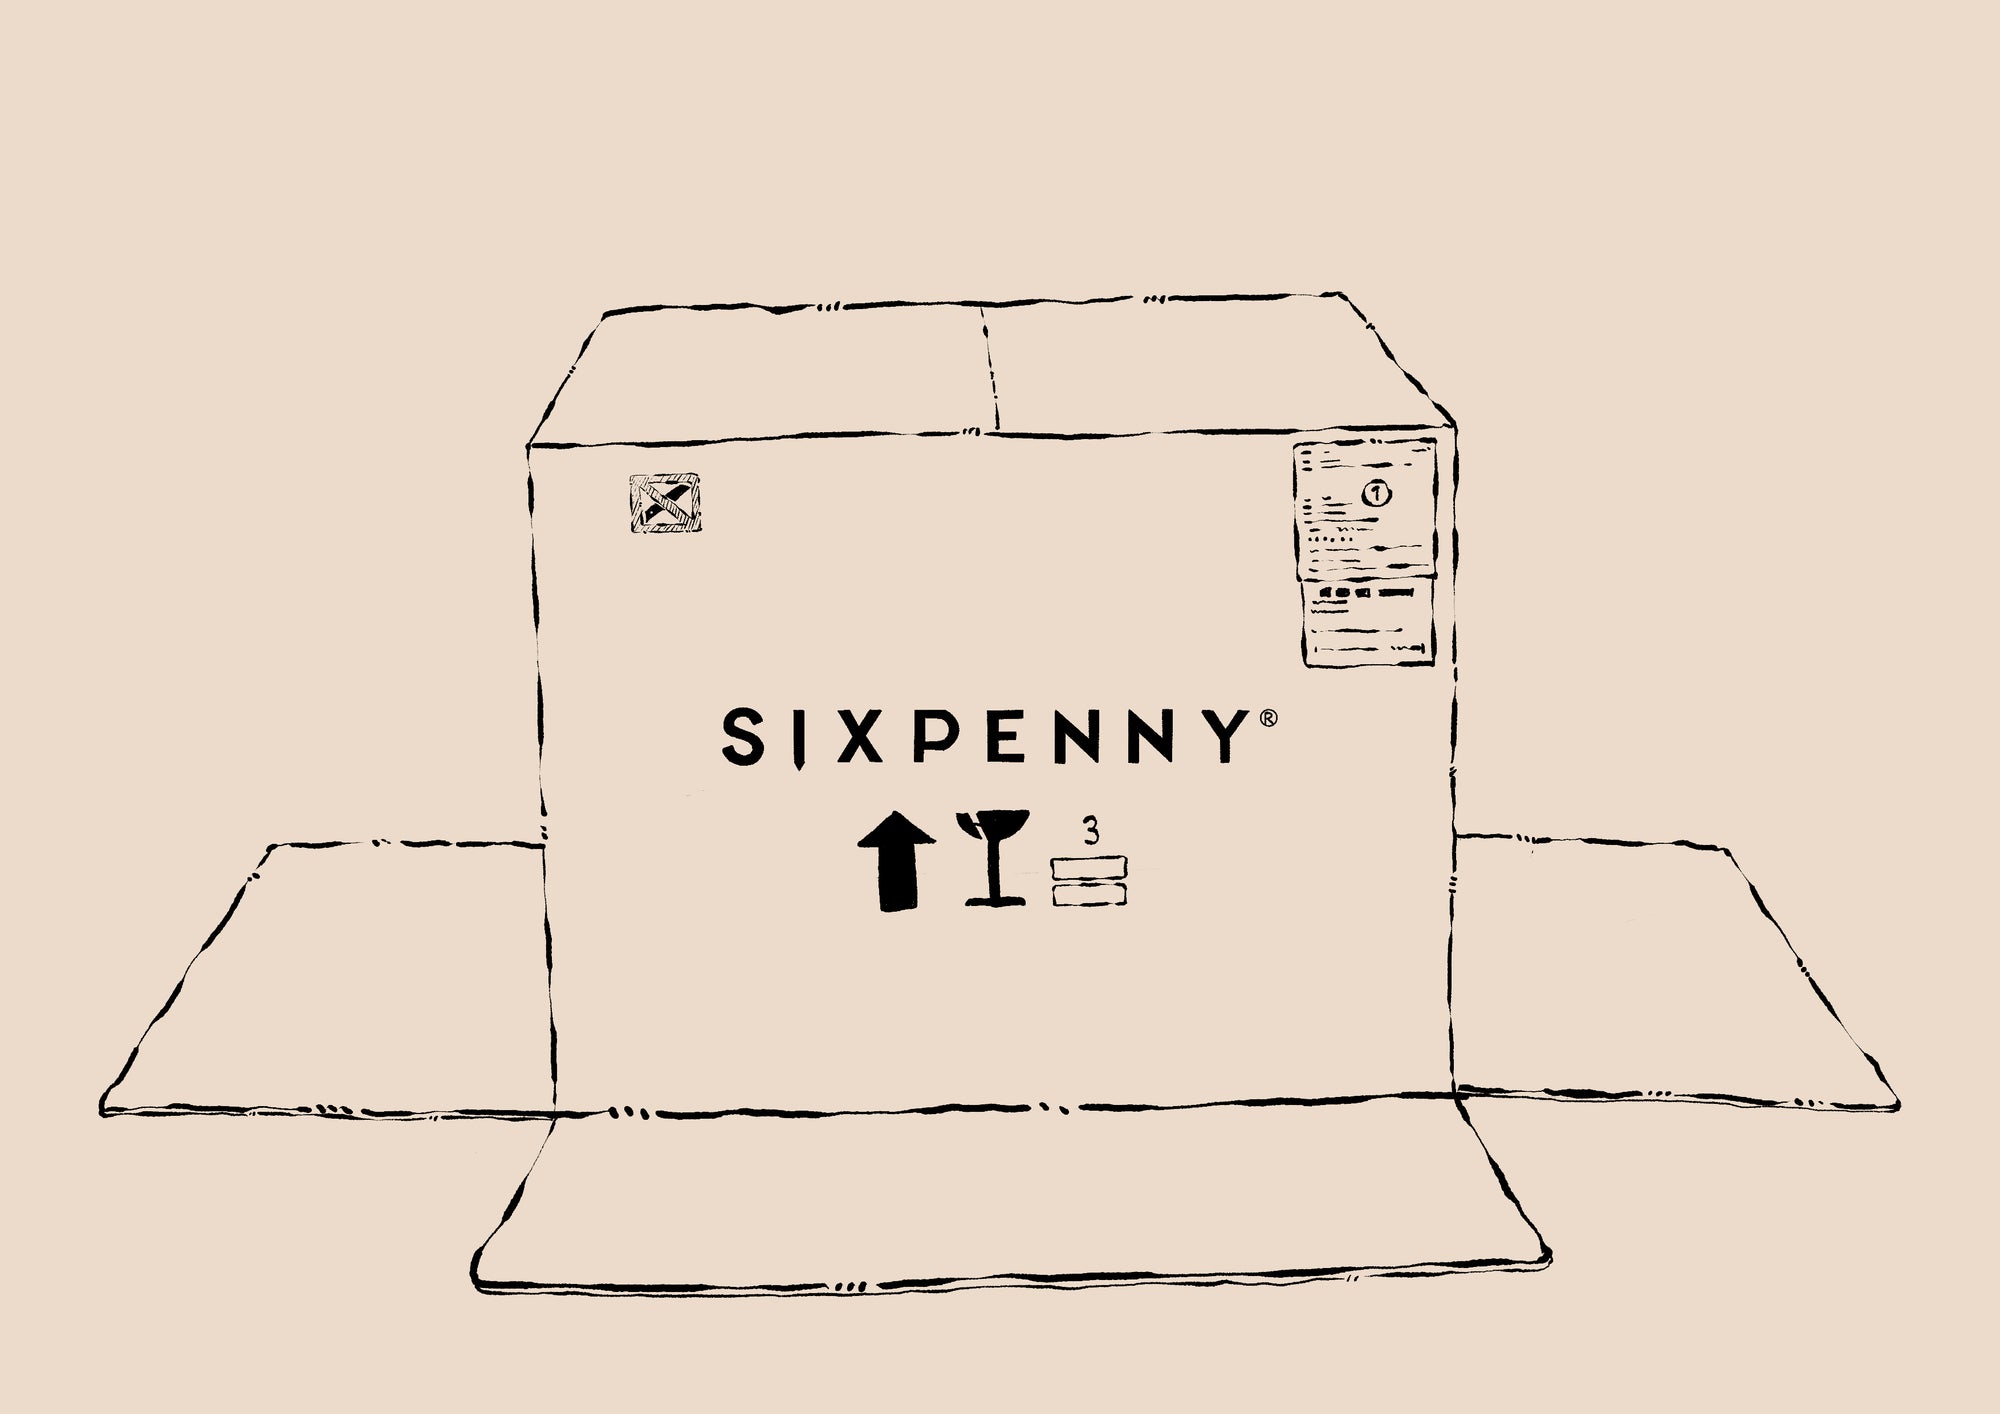 Unboxing your Sixpenny.